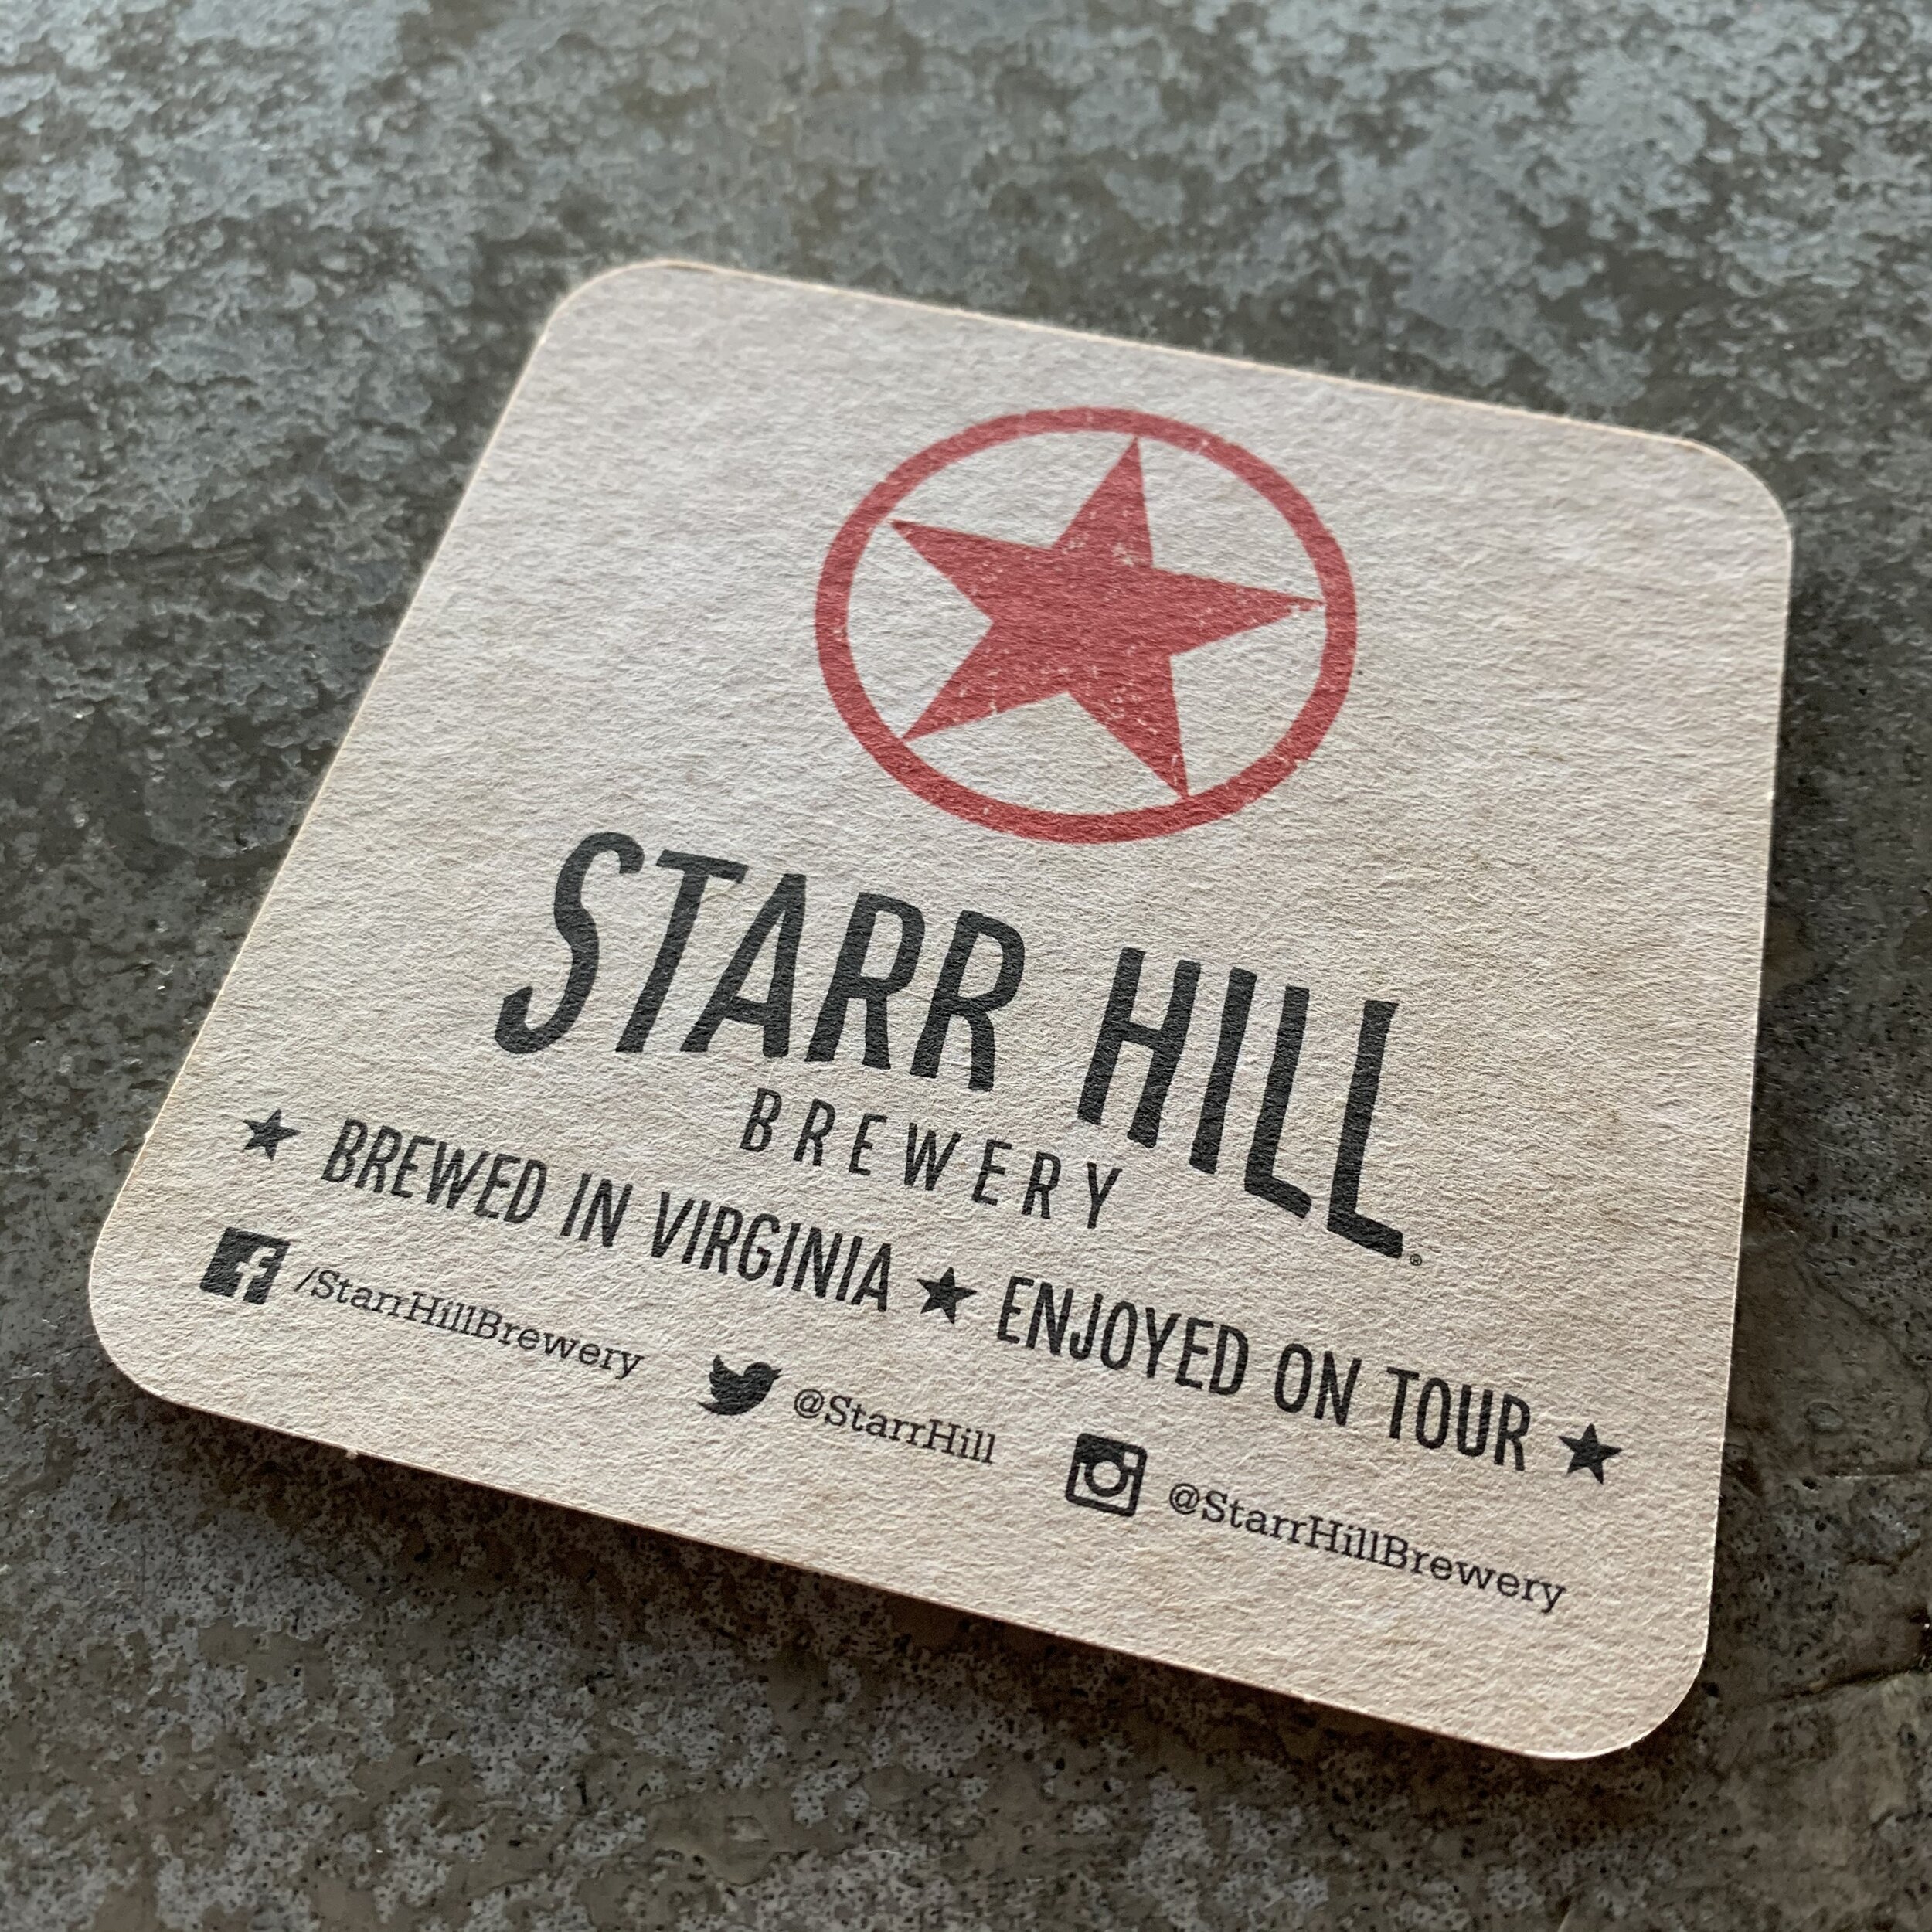 STARR HILL BREWERY Beer COASTER Charlottesville VIRGINIA Mat with STAR